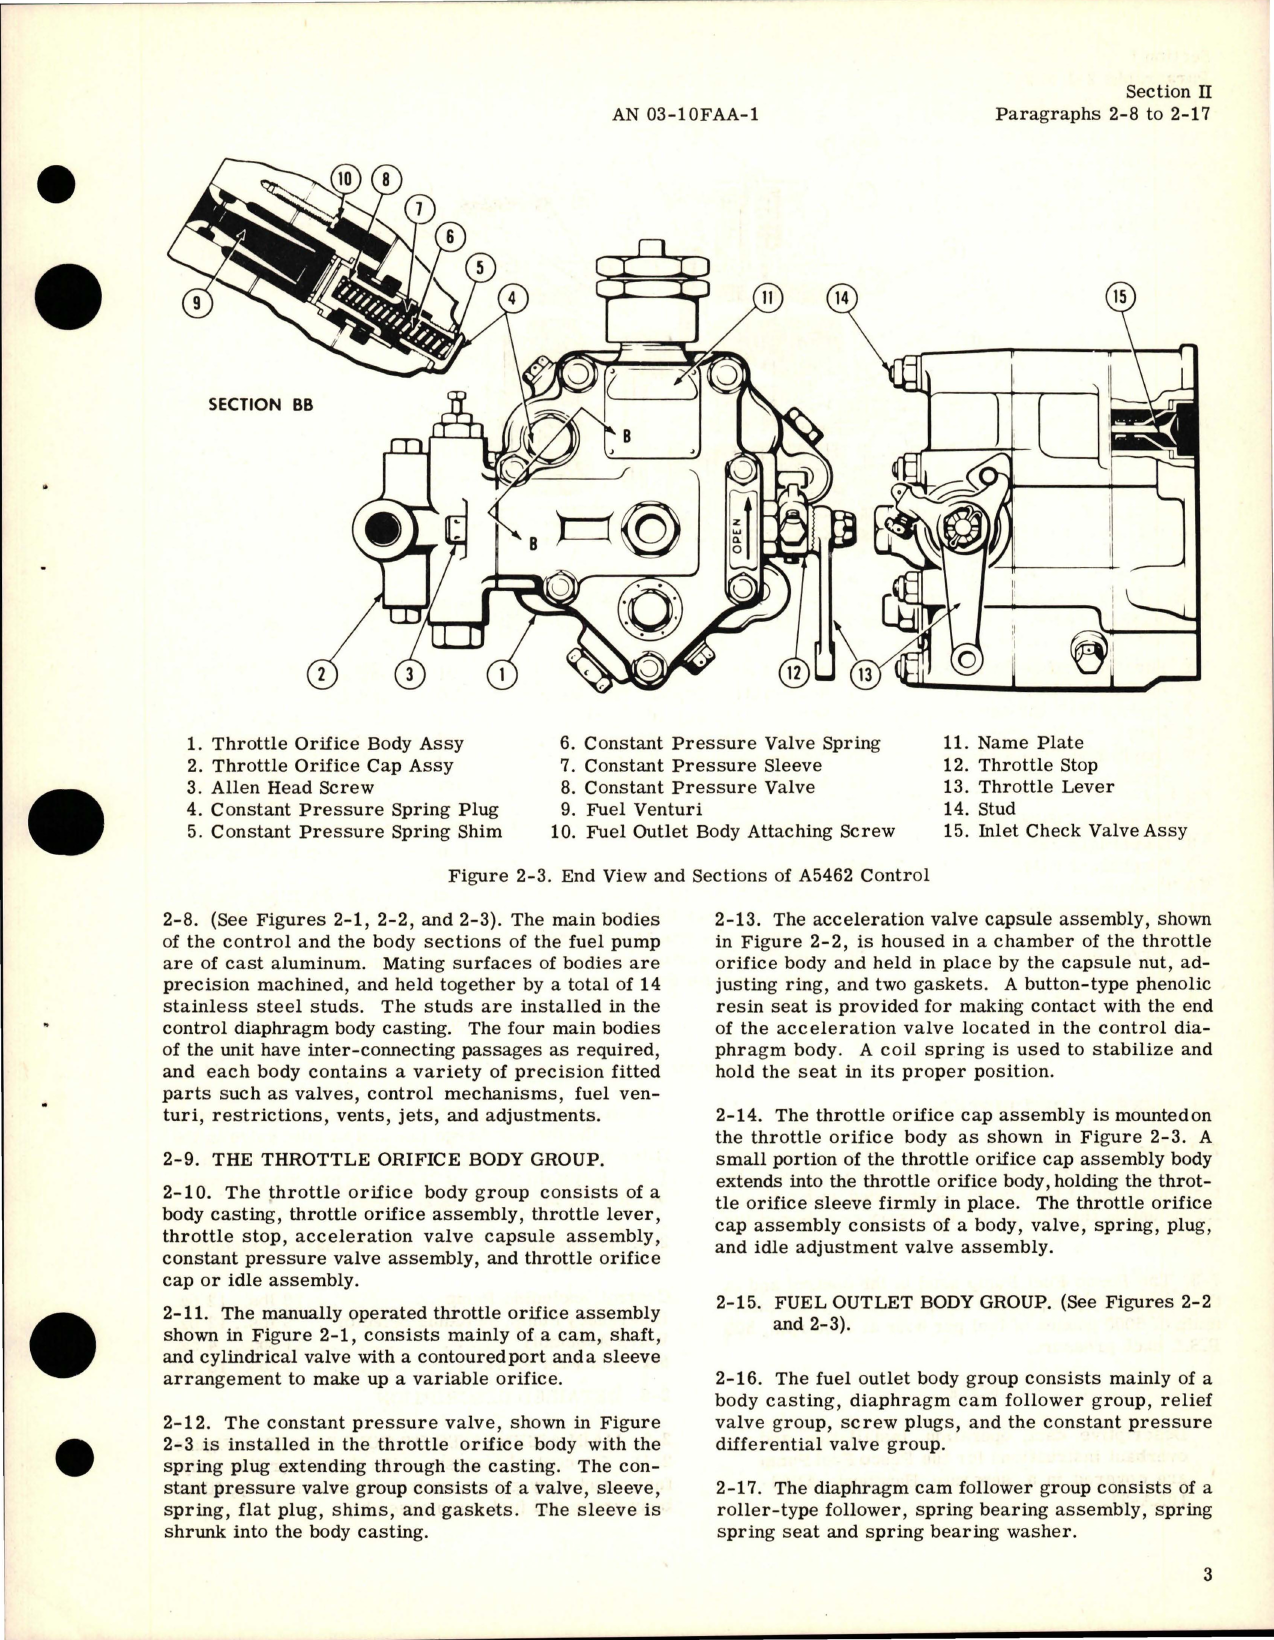 Sample page 7 from AirCorps Library document: Overhaul Instructions for Fuel Control - Model A5462 and Emergency Fuel Pump